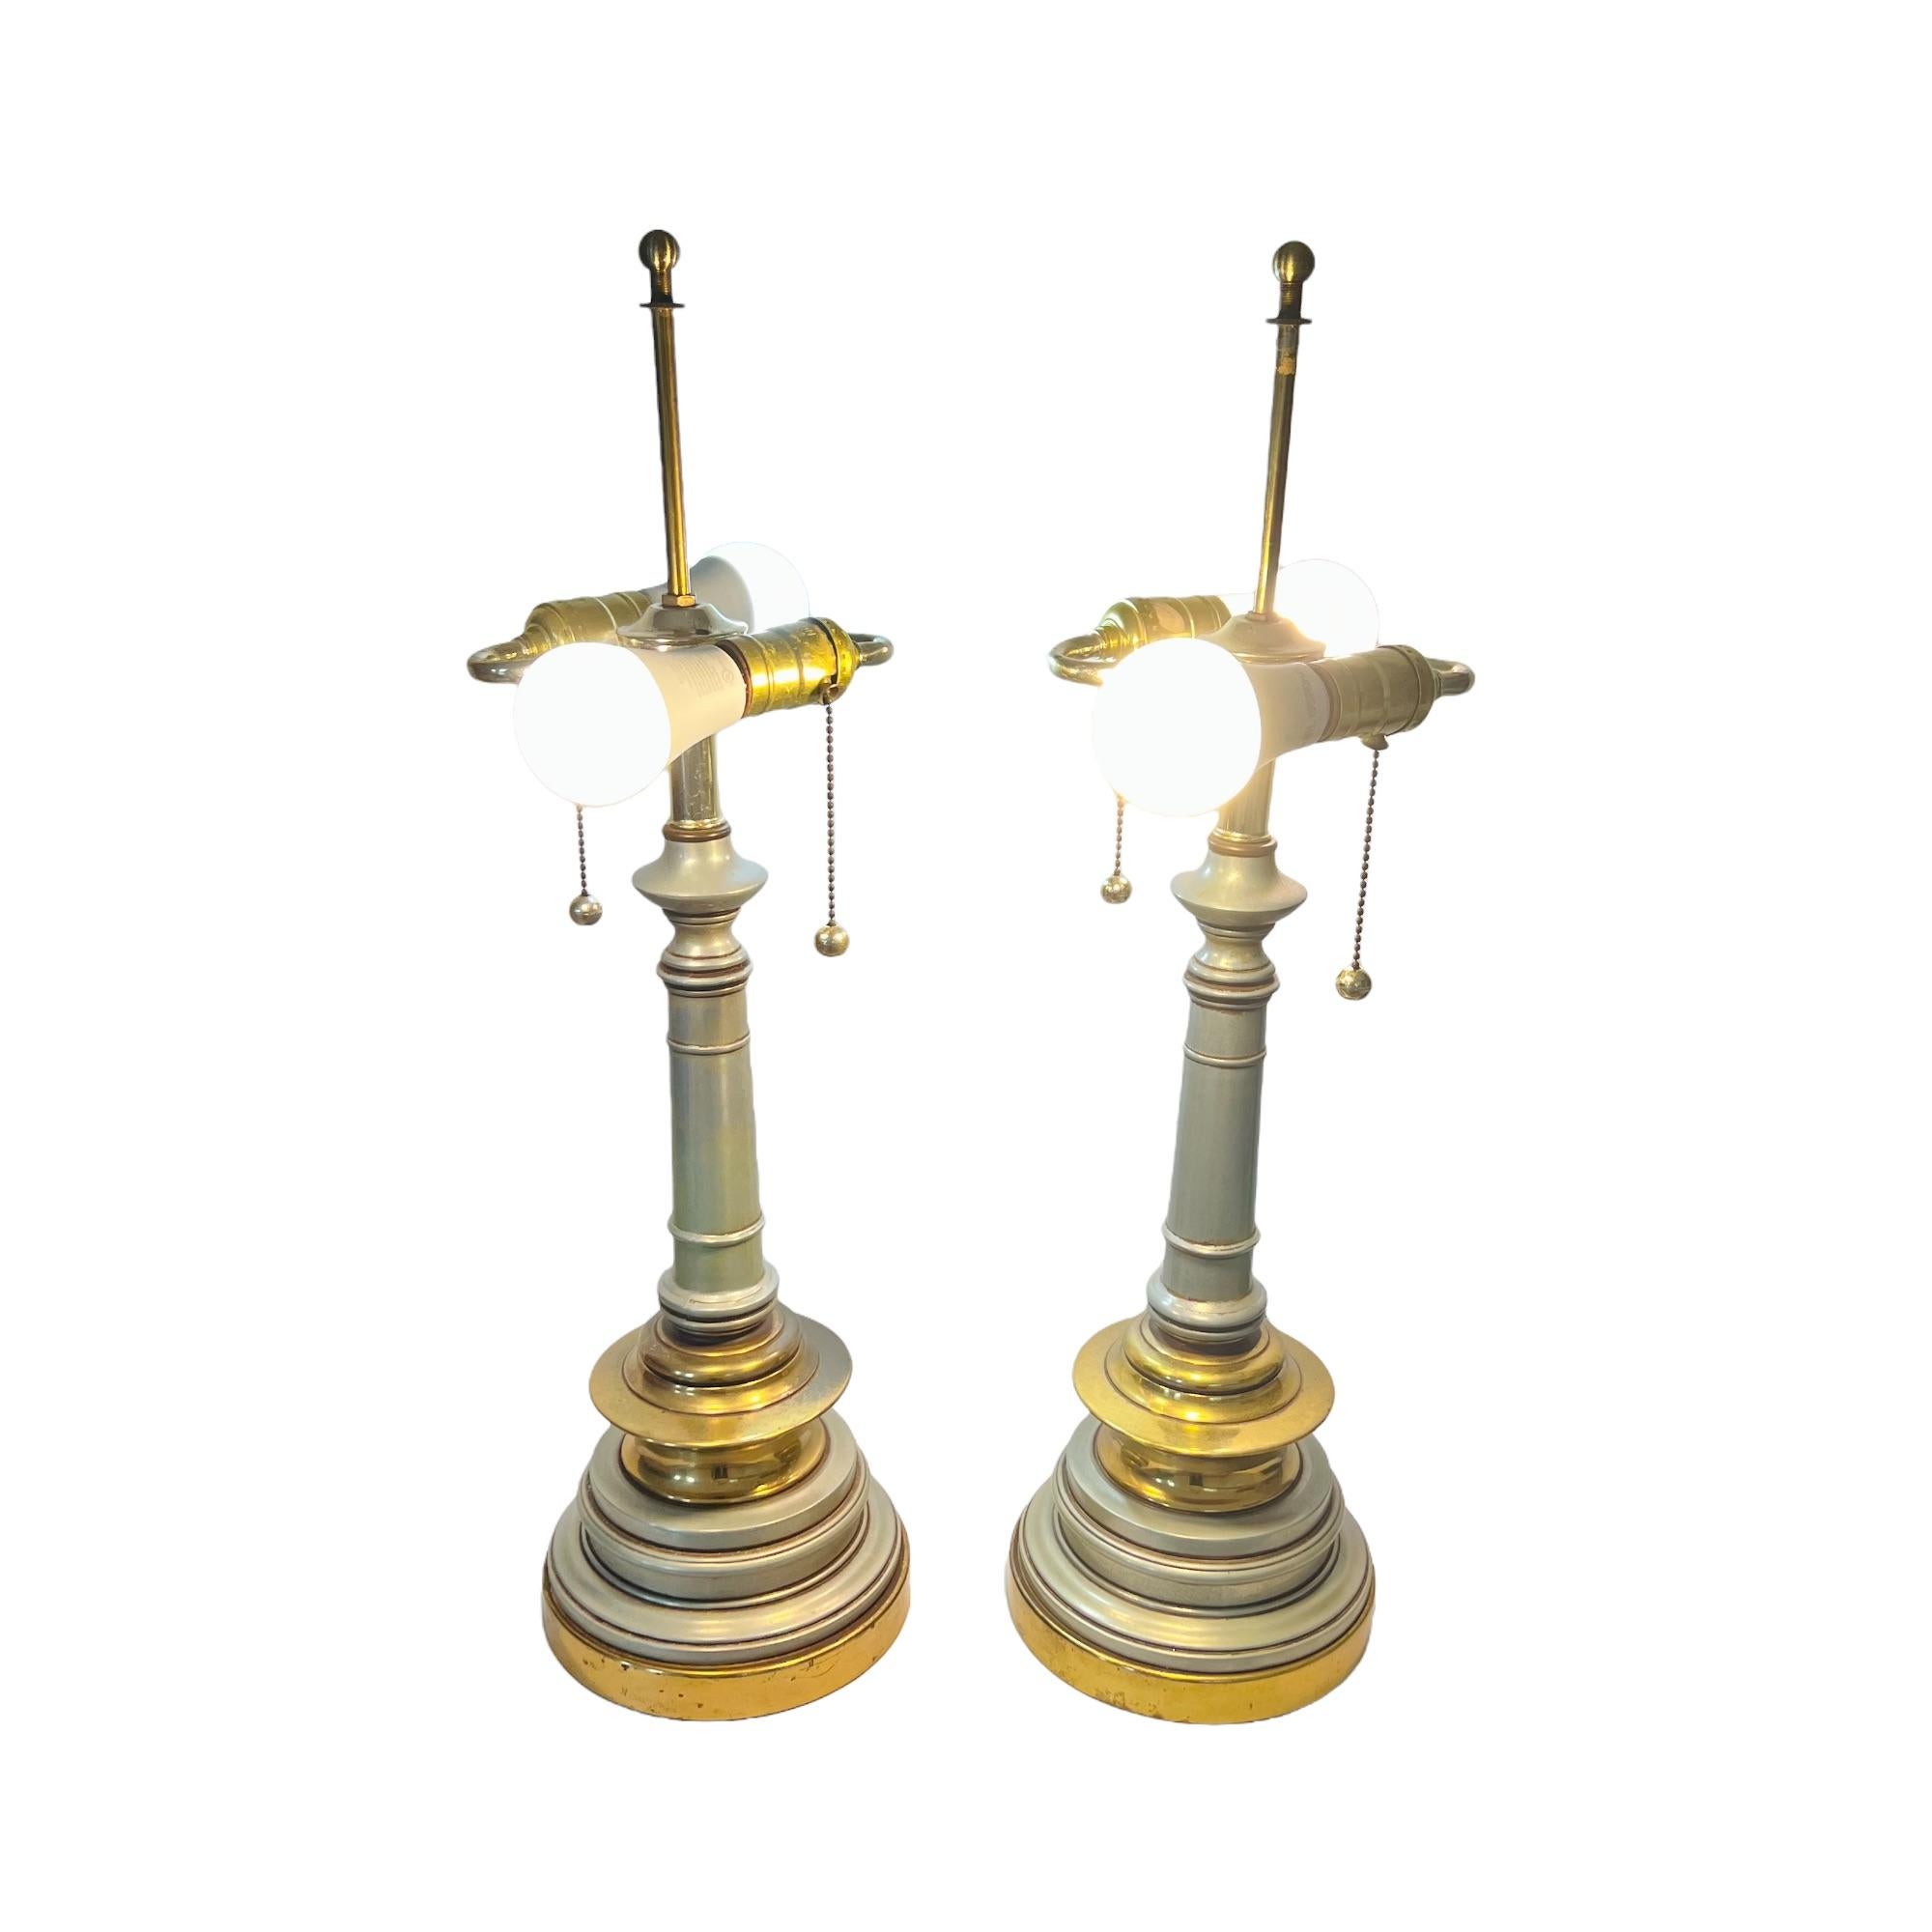 20th Century Hollywood Regency Enamel & Brass Lamps with Yellow Shades, a Pair